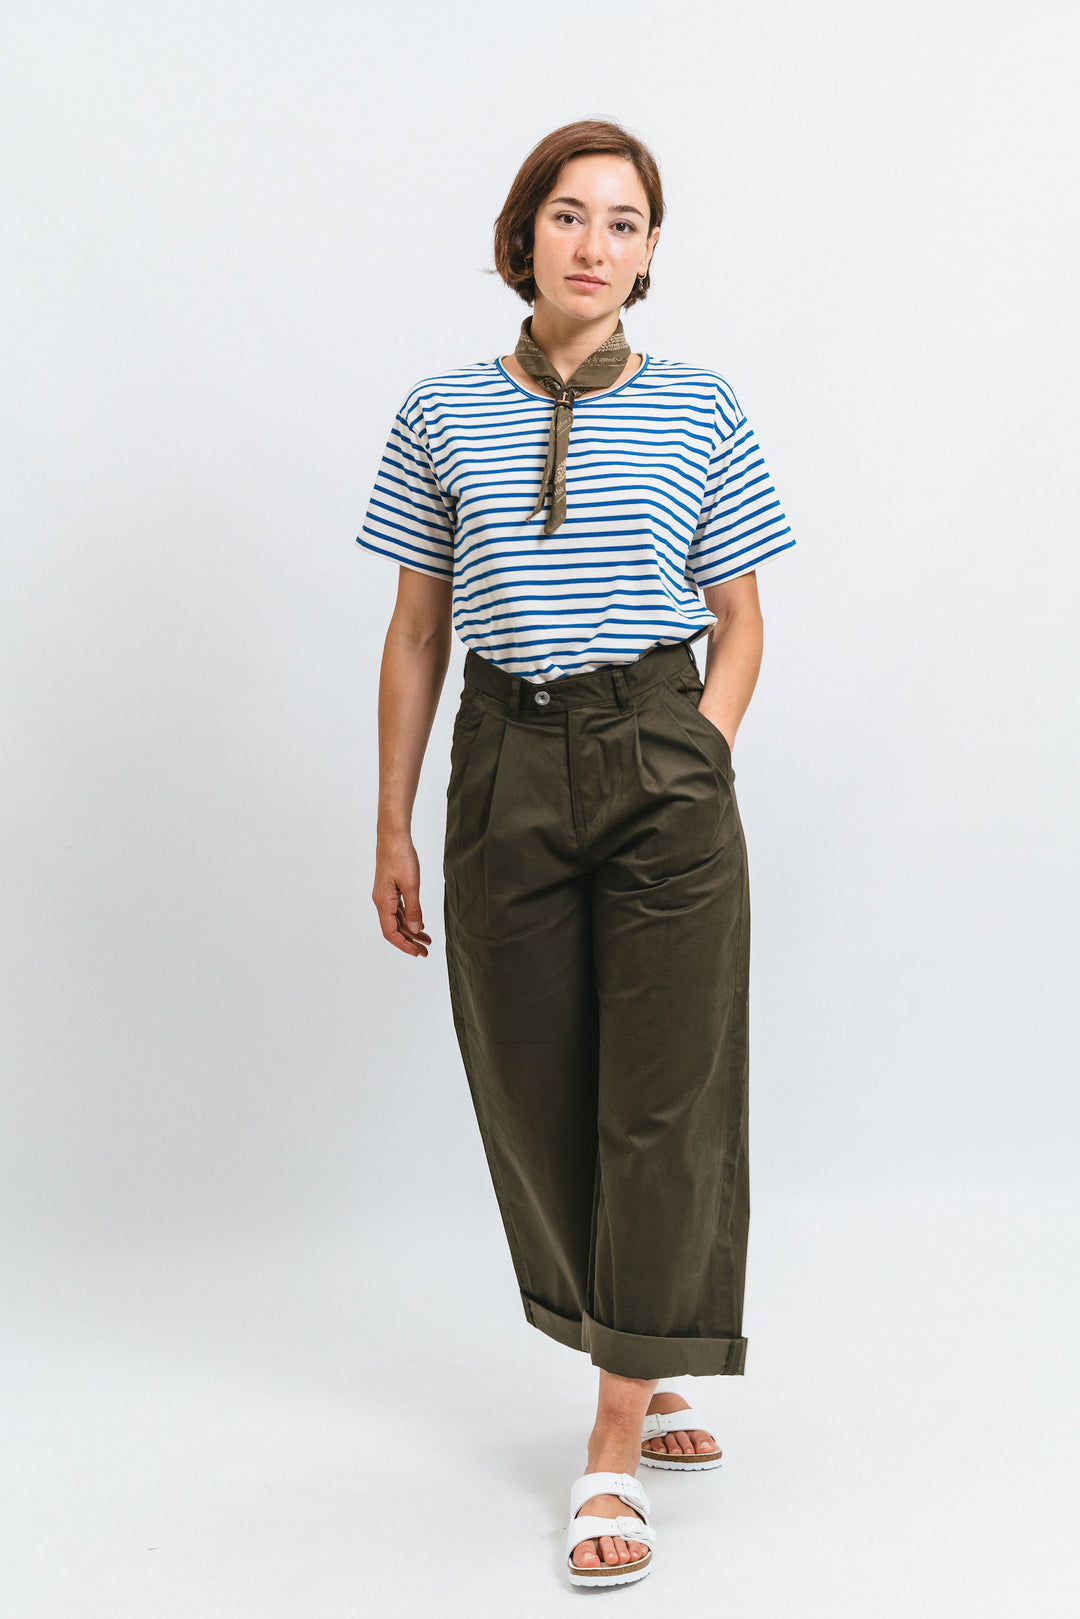 Wide Leg Pleated W/Chino Pants Army